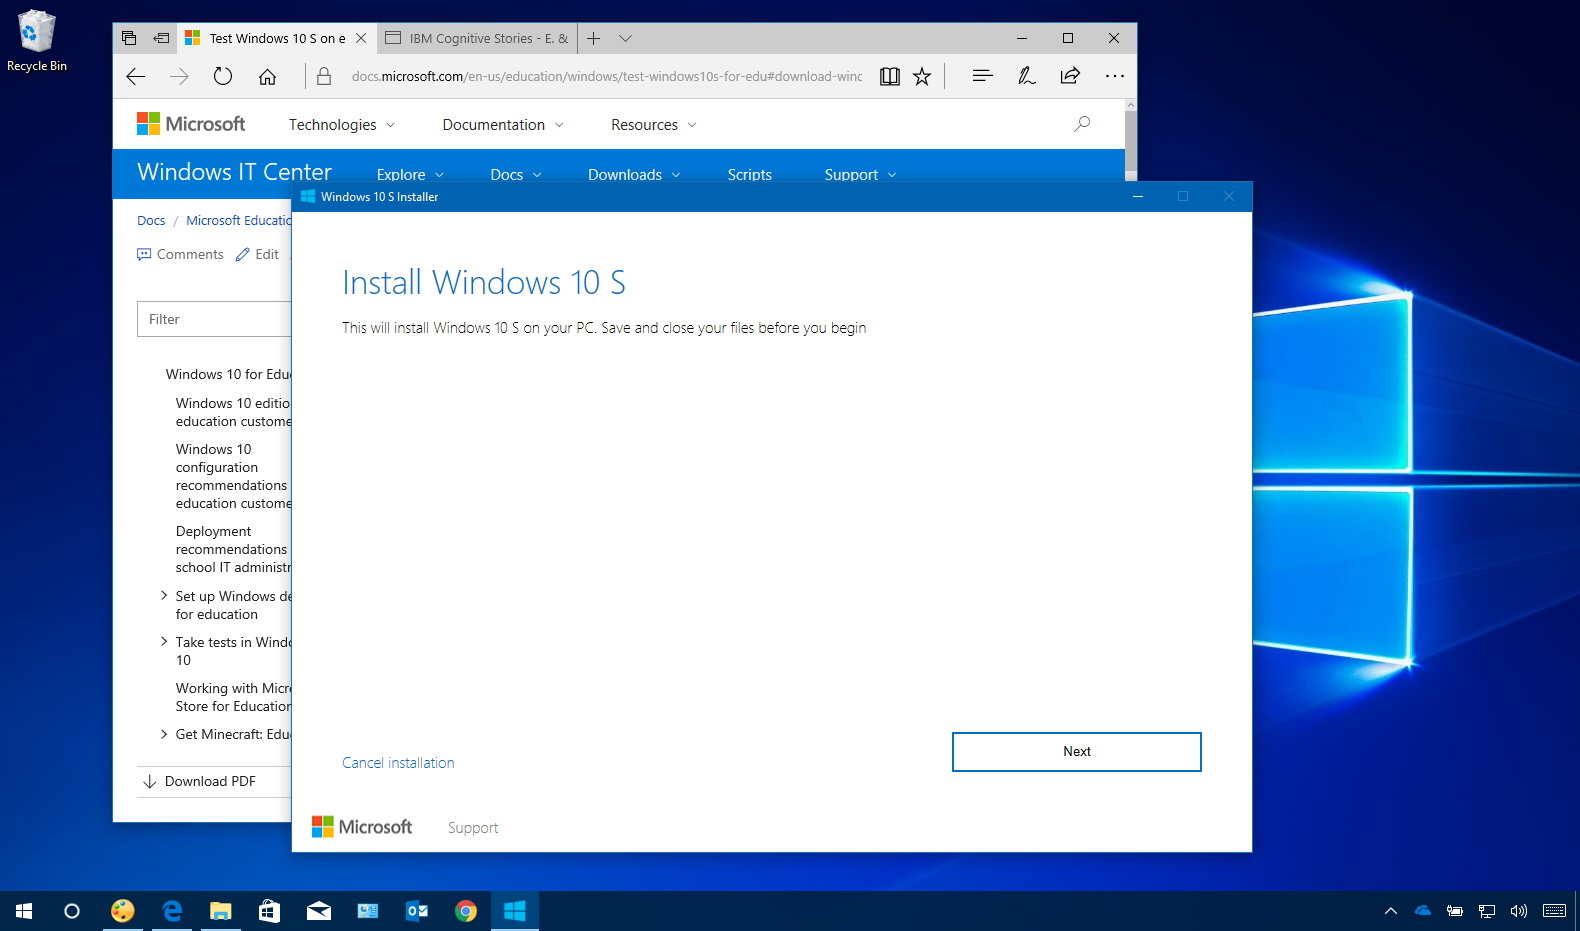 Microsoft releases installer to download Windows 10 S on any PC